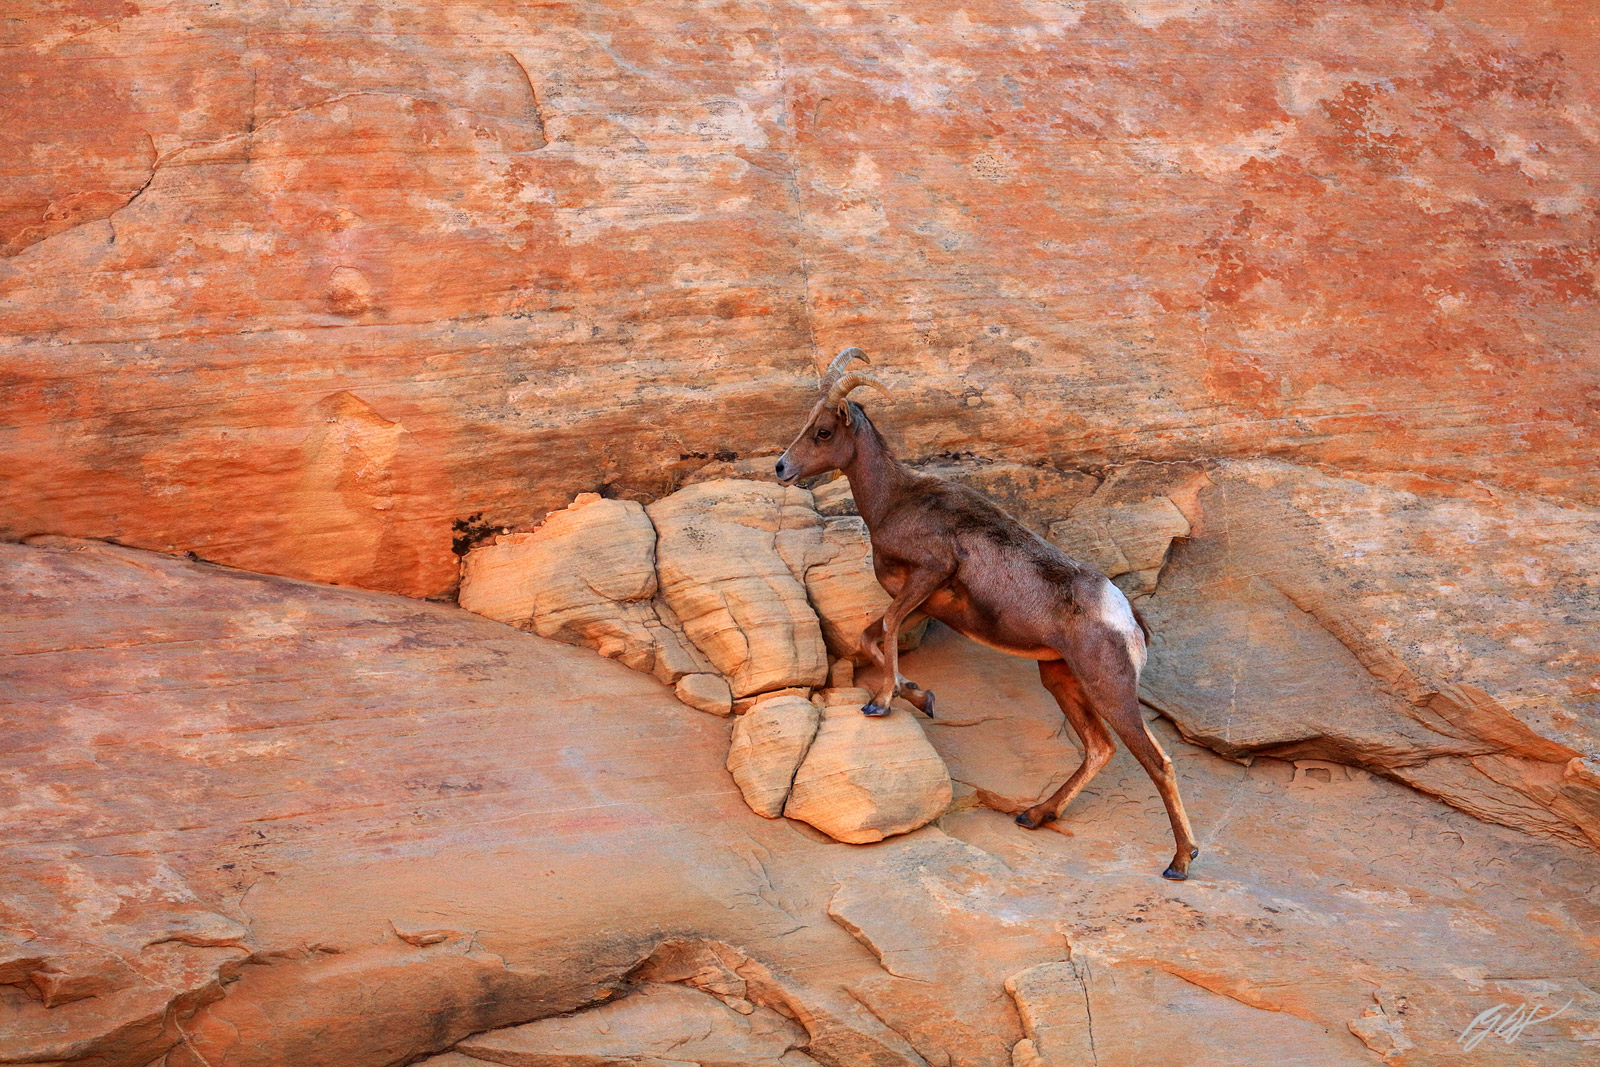 Big Horn sheep in Valley of Fire State Park in Nevada